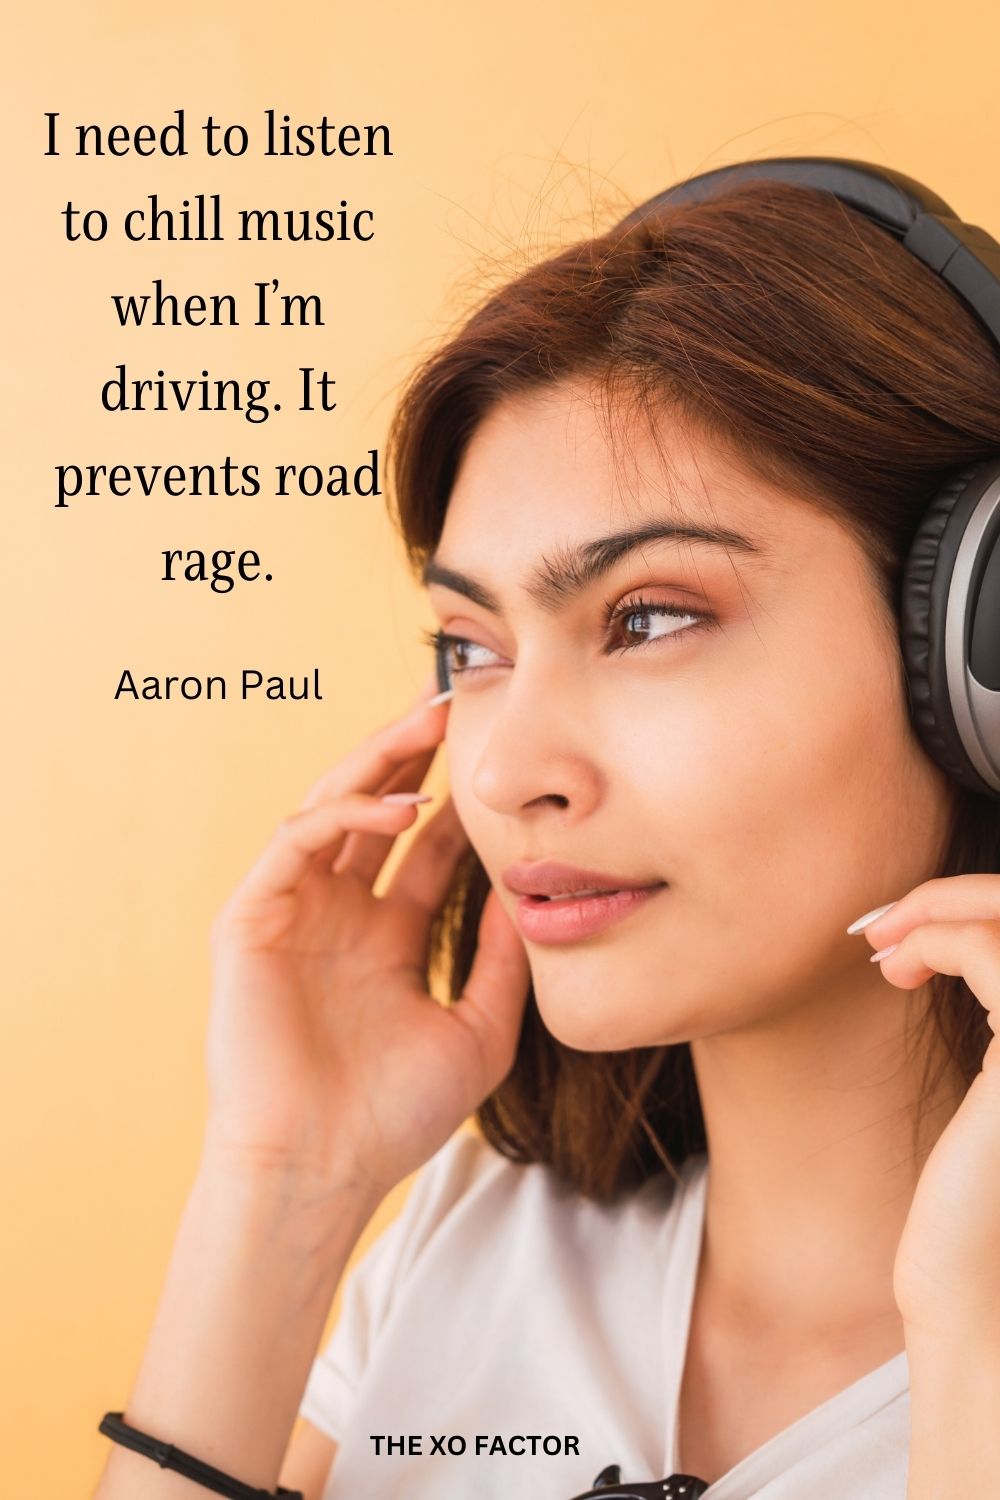 I need to listen to chill music when I’m driving. It prevents road rage.
Aaron Paul